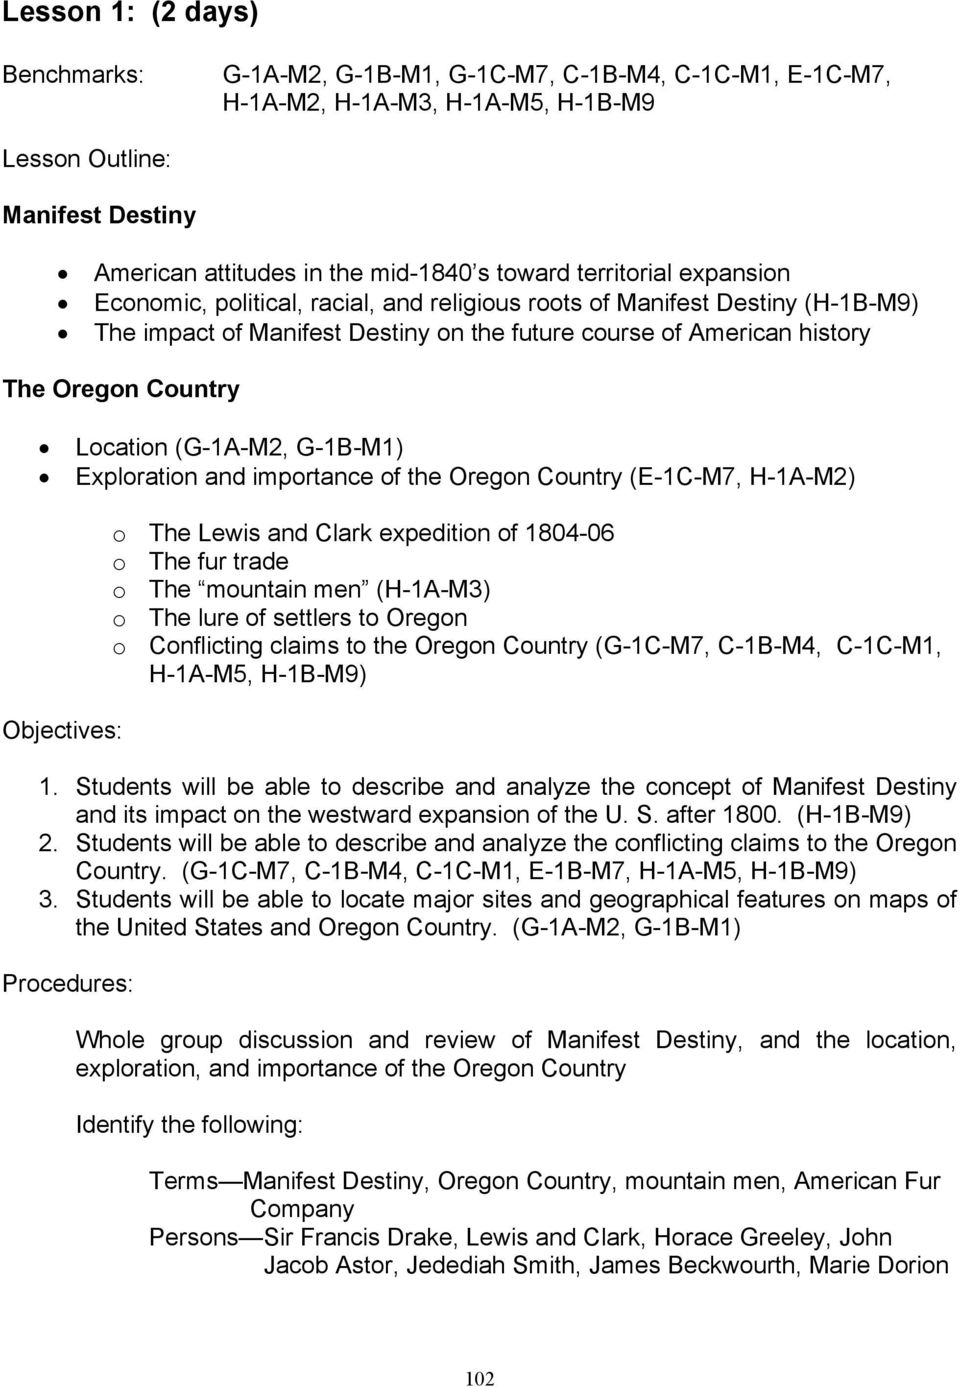 Location (G-1A-M2, G-1B-M1) Exploration and importance of the Oregon Country (E-1C-M7, H-1A-M2) Objectives: o The Lewis and Clark expedition of 1804-06 o The fur trade o The mountain men (H-1A-M3) o